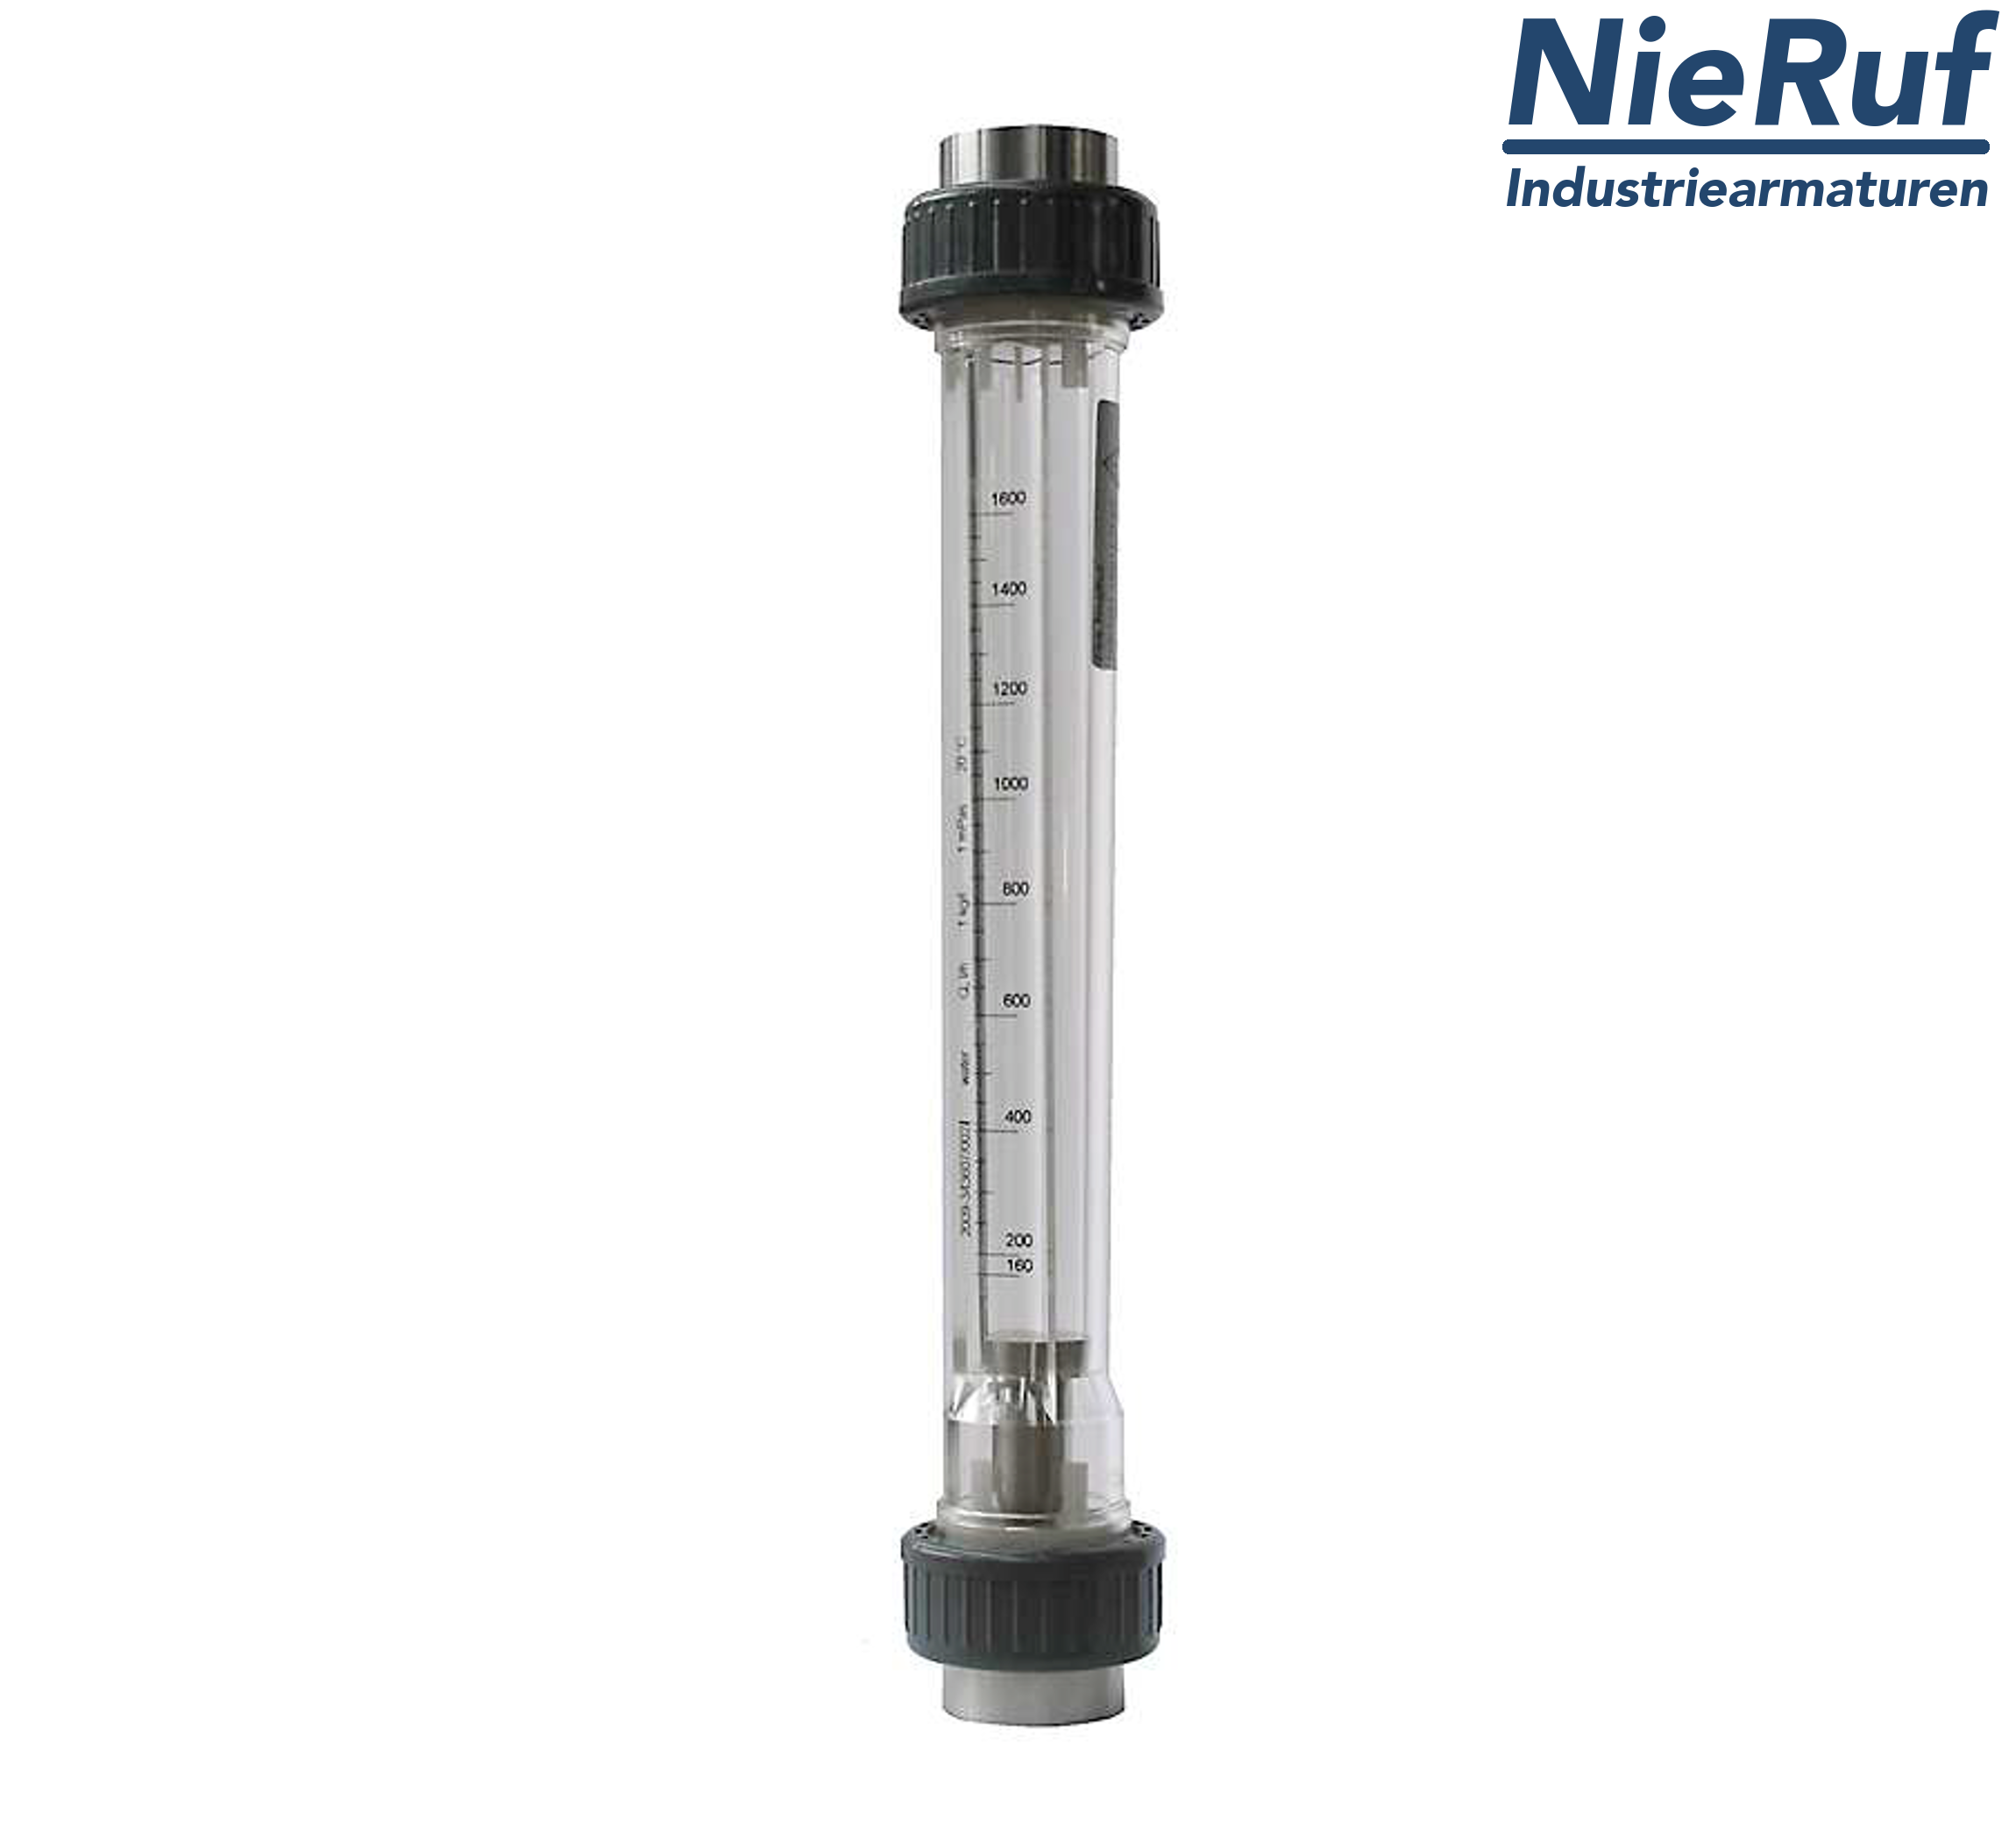 Variable area flowmeter 1" inch 100.0 - 1000 l/h water NBR